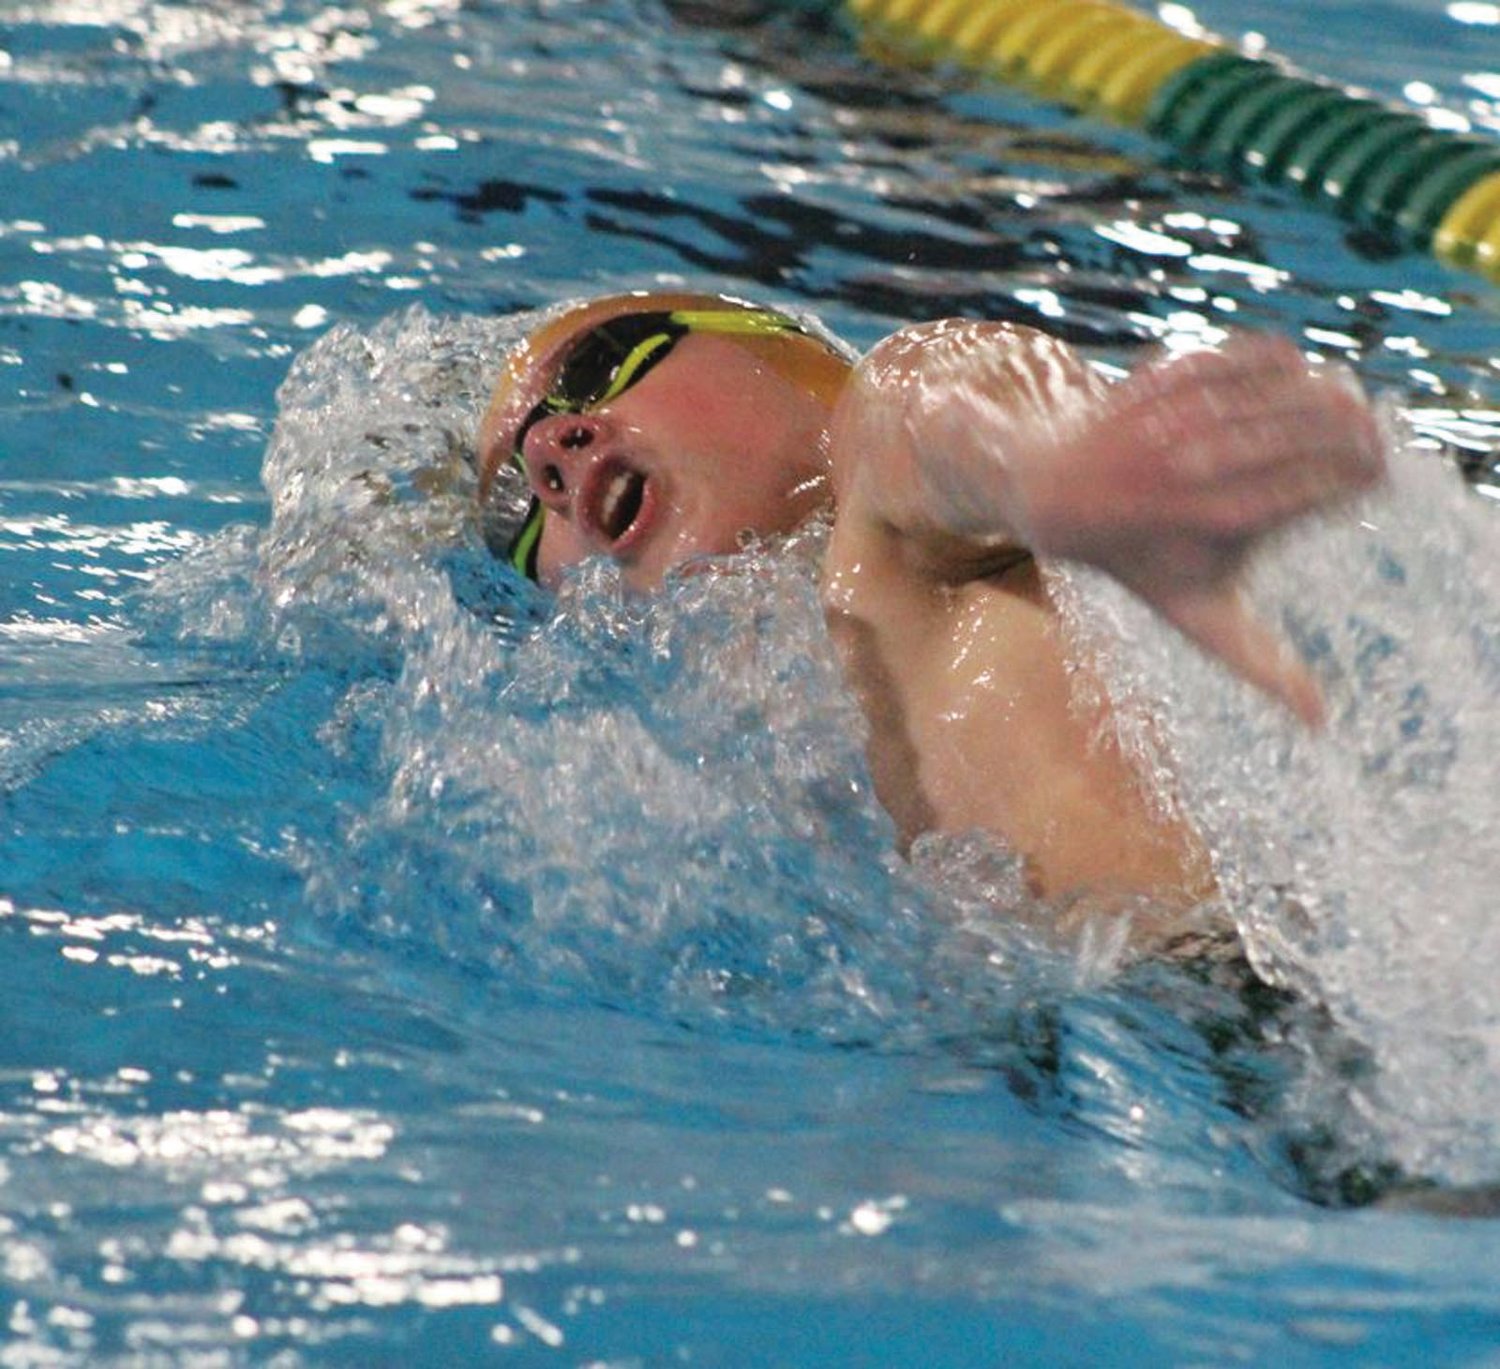 SWIMMING AWAY WITH
THE WIN: Bishop Hendricken’s
Ryan Kornacki
competes against visiting
La Salle Academy last
week at the McDermott
Pool in Warwick. The
Hawks rolled to a 69-25
win over the Rams, and Kornacki
came up big with
two second-place finishes.
The defending champs are
back at it this Thursday
when they host Lincoln.